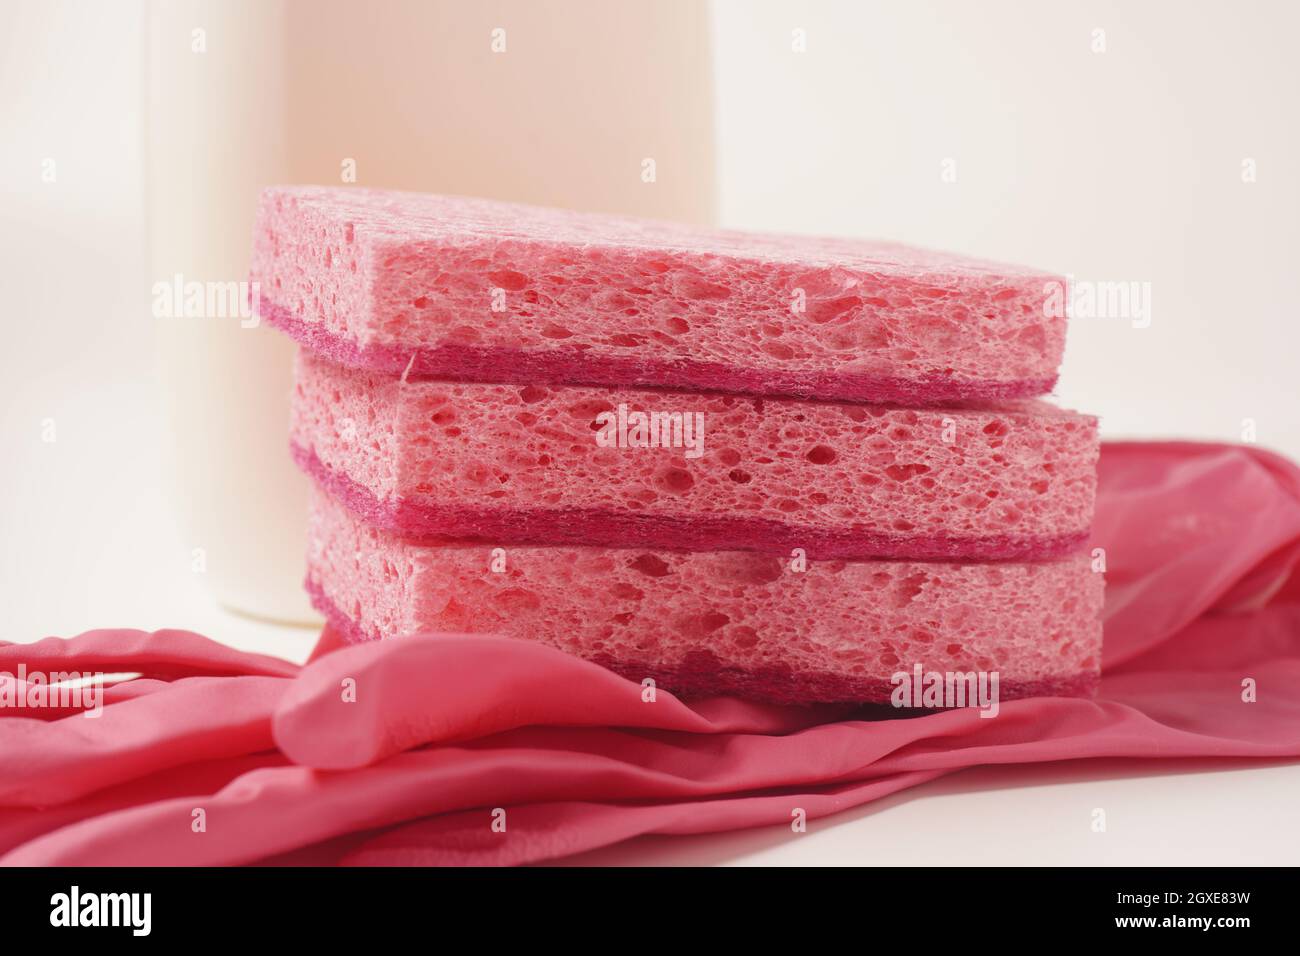 Sponges and rubber cloves for washing dishes and other domestic needs Stock Photo